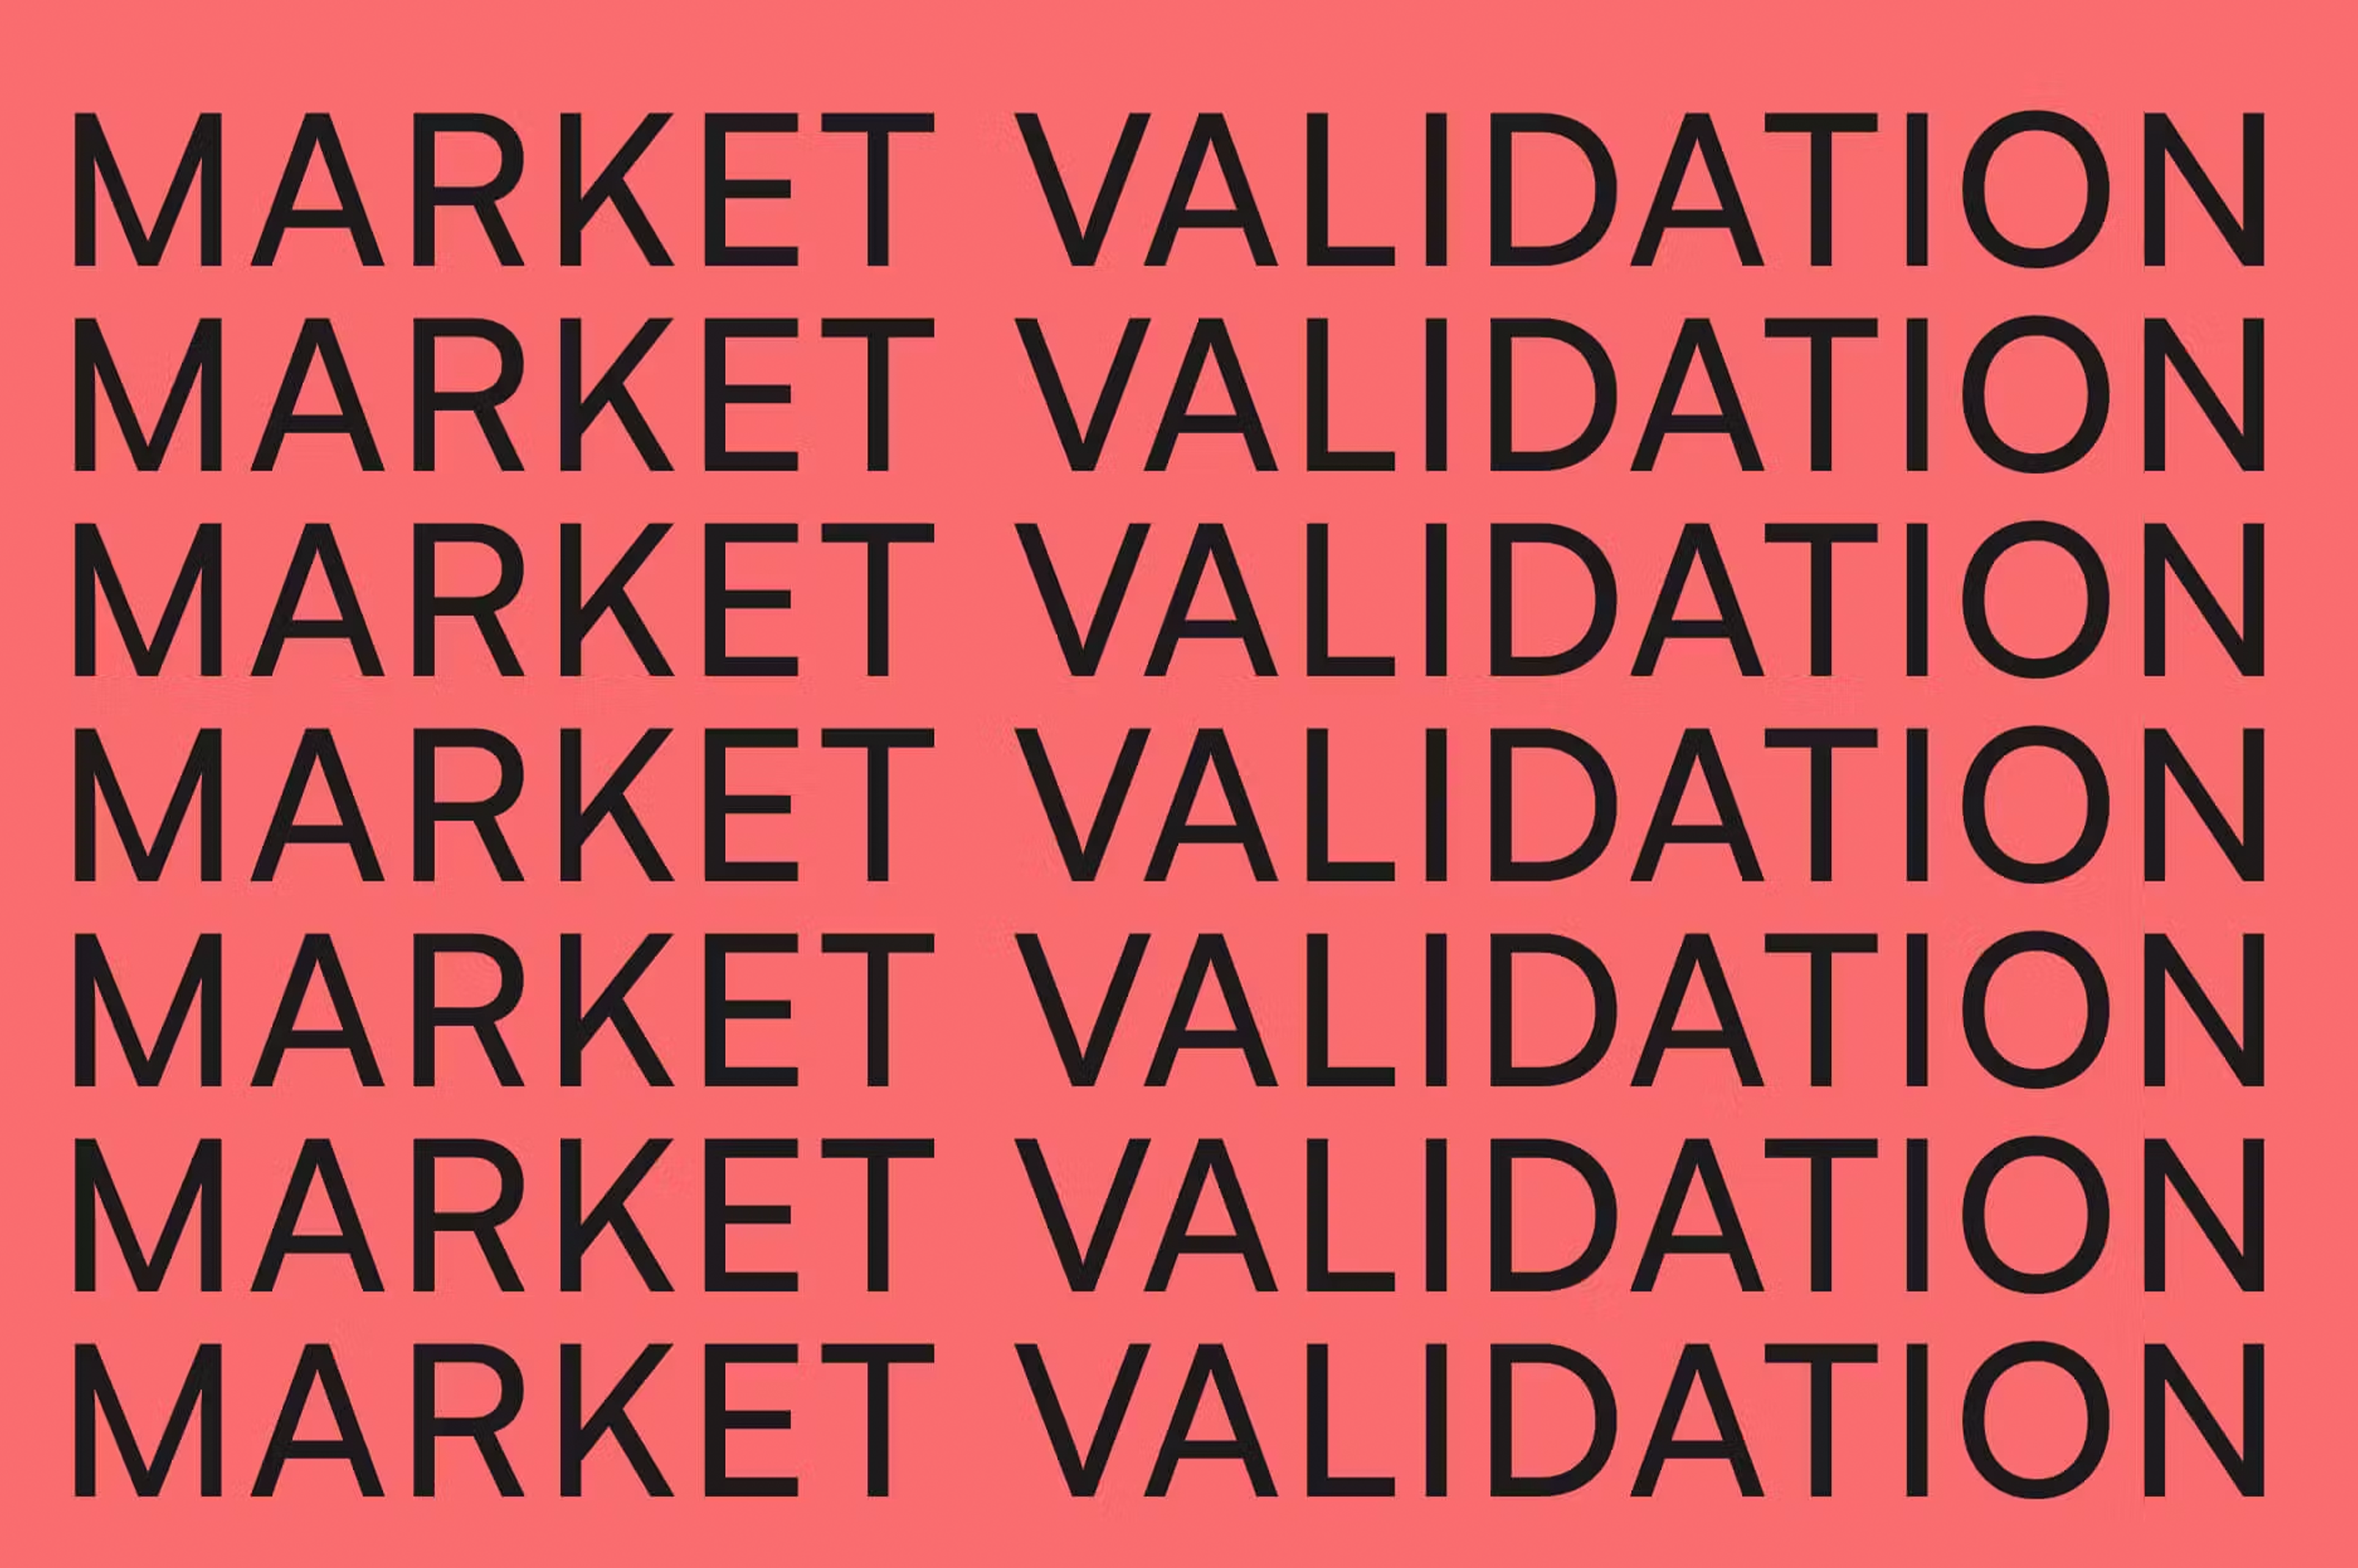 Picture of text on pink background reading as Market Validation